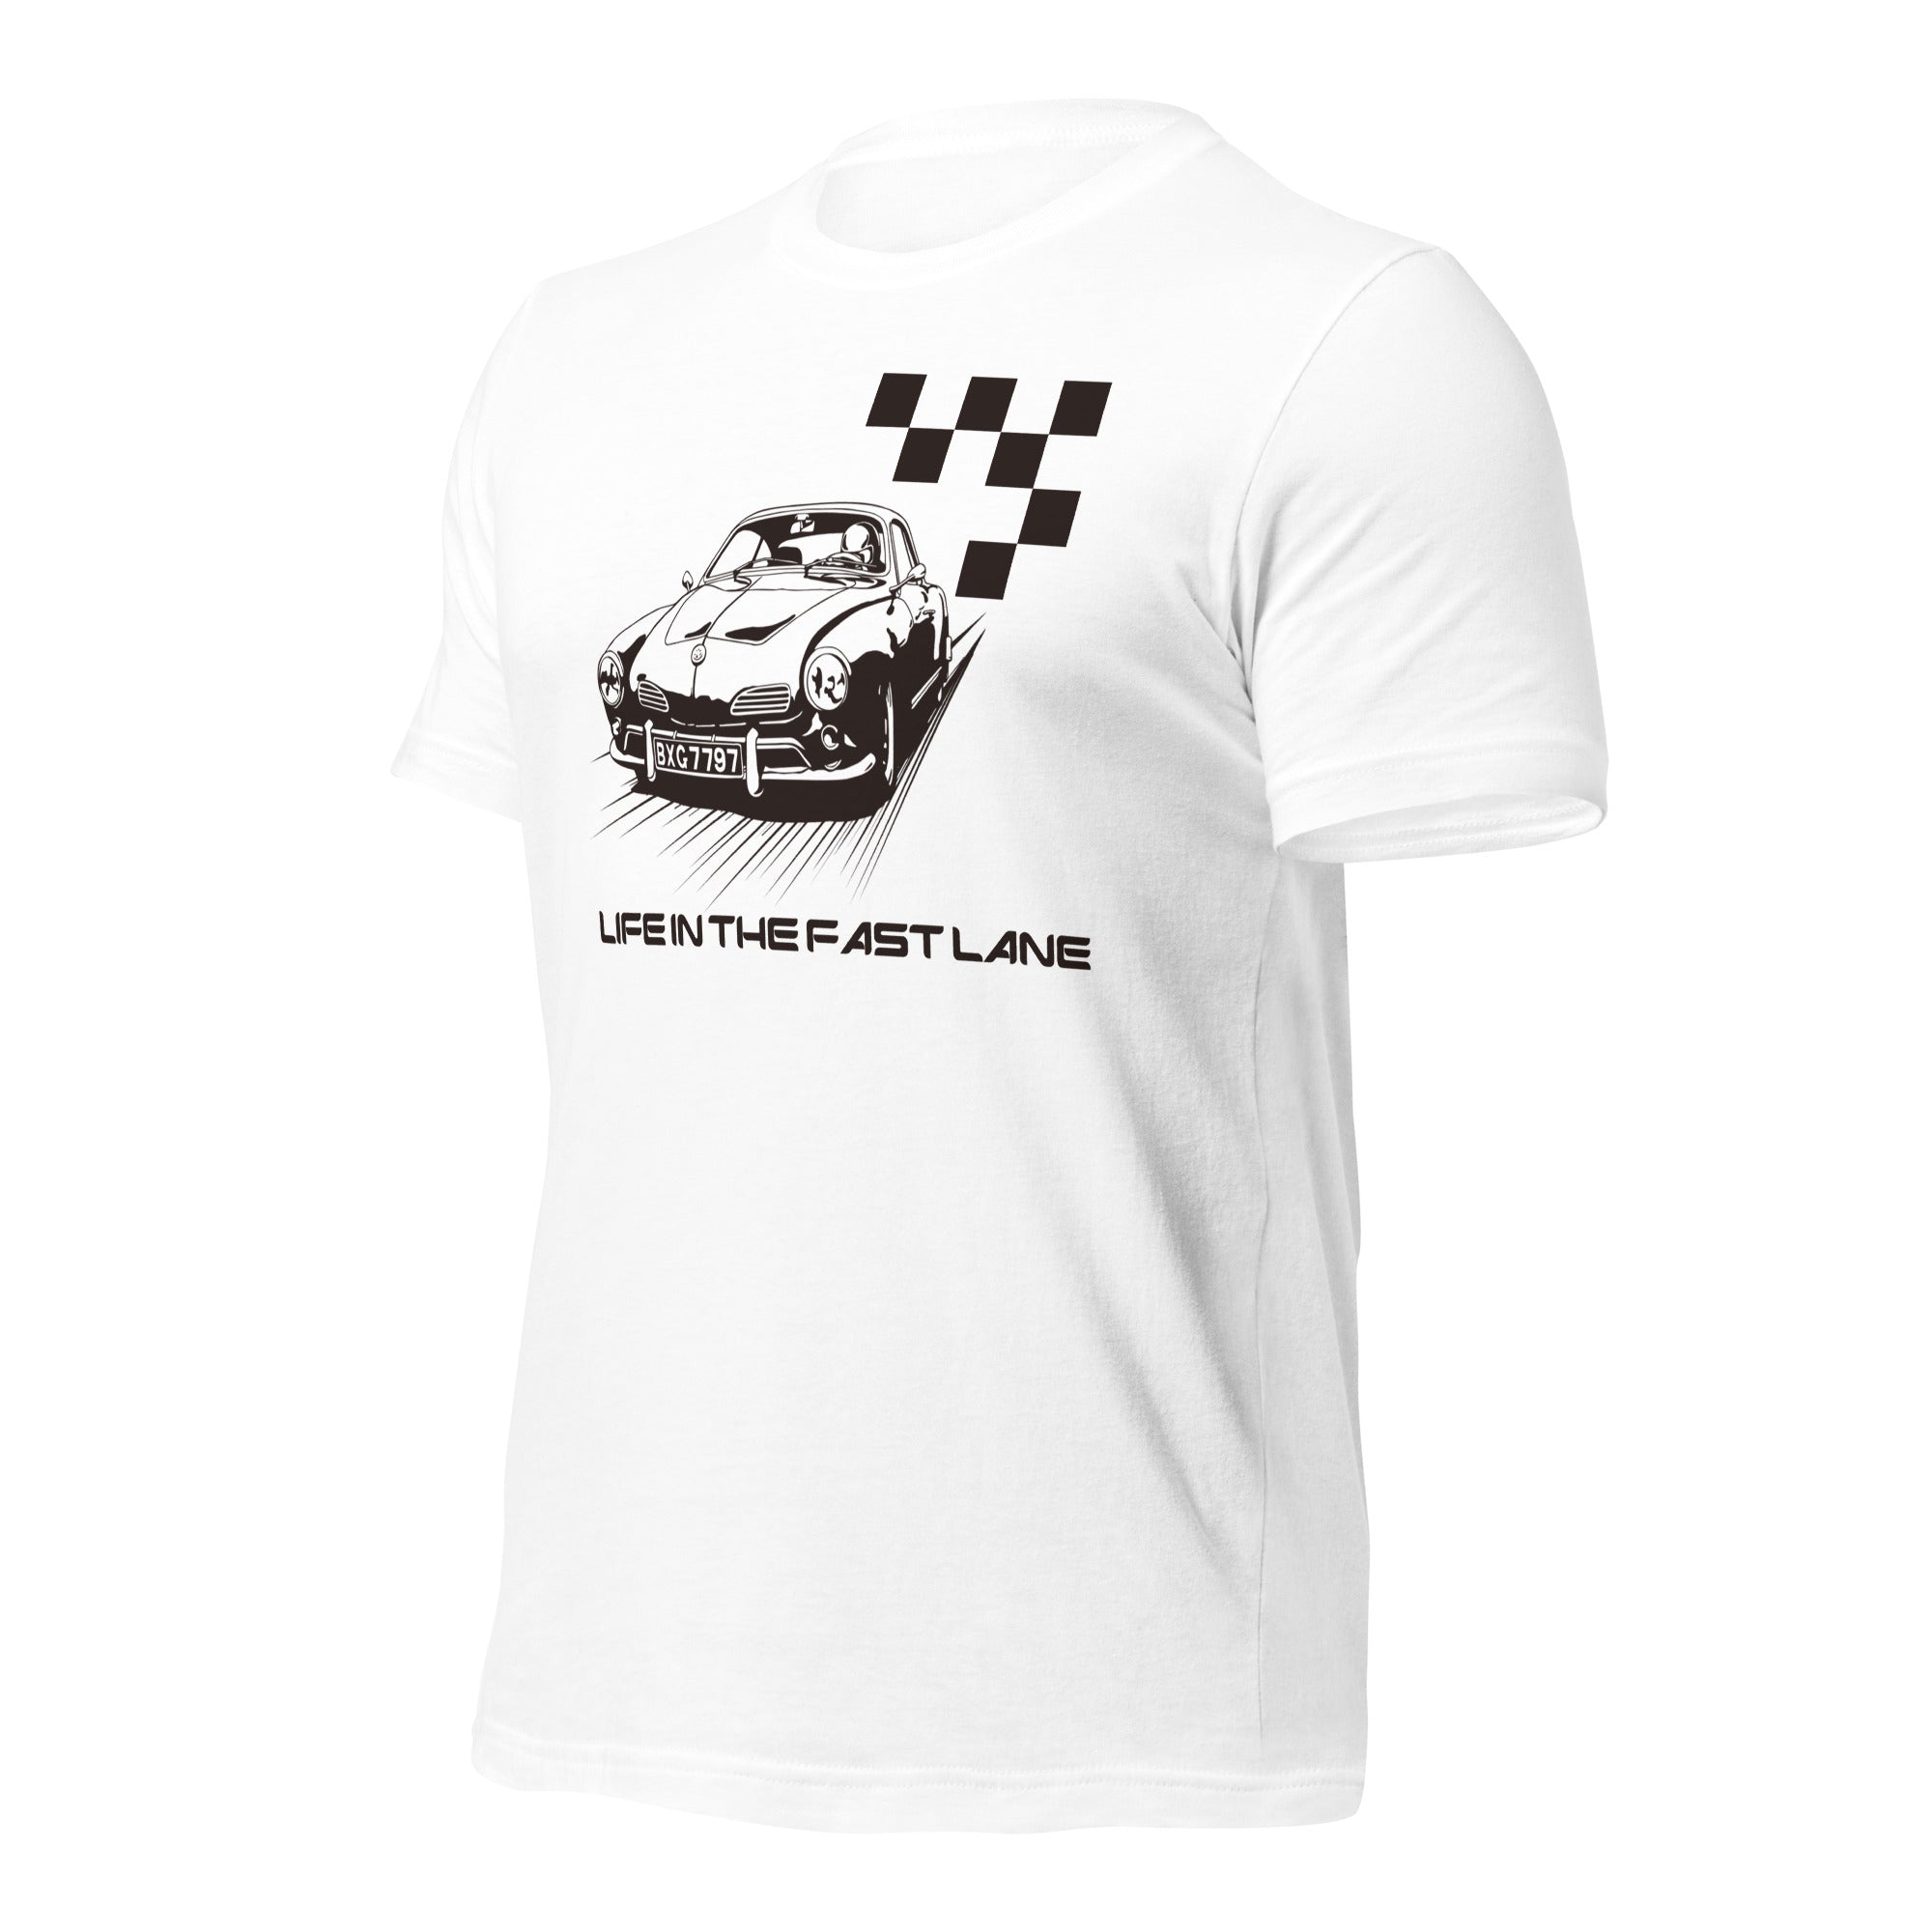 Unisex Staple T-Shirt - Life In The Fast Lane Car Racing - GRAPHIC T-SHIRTS